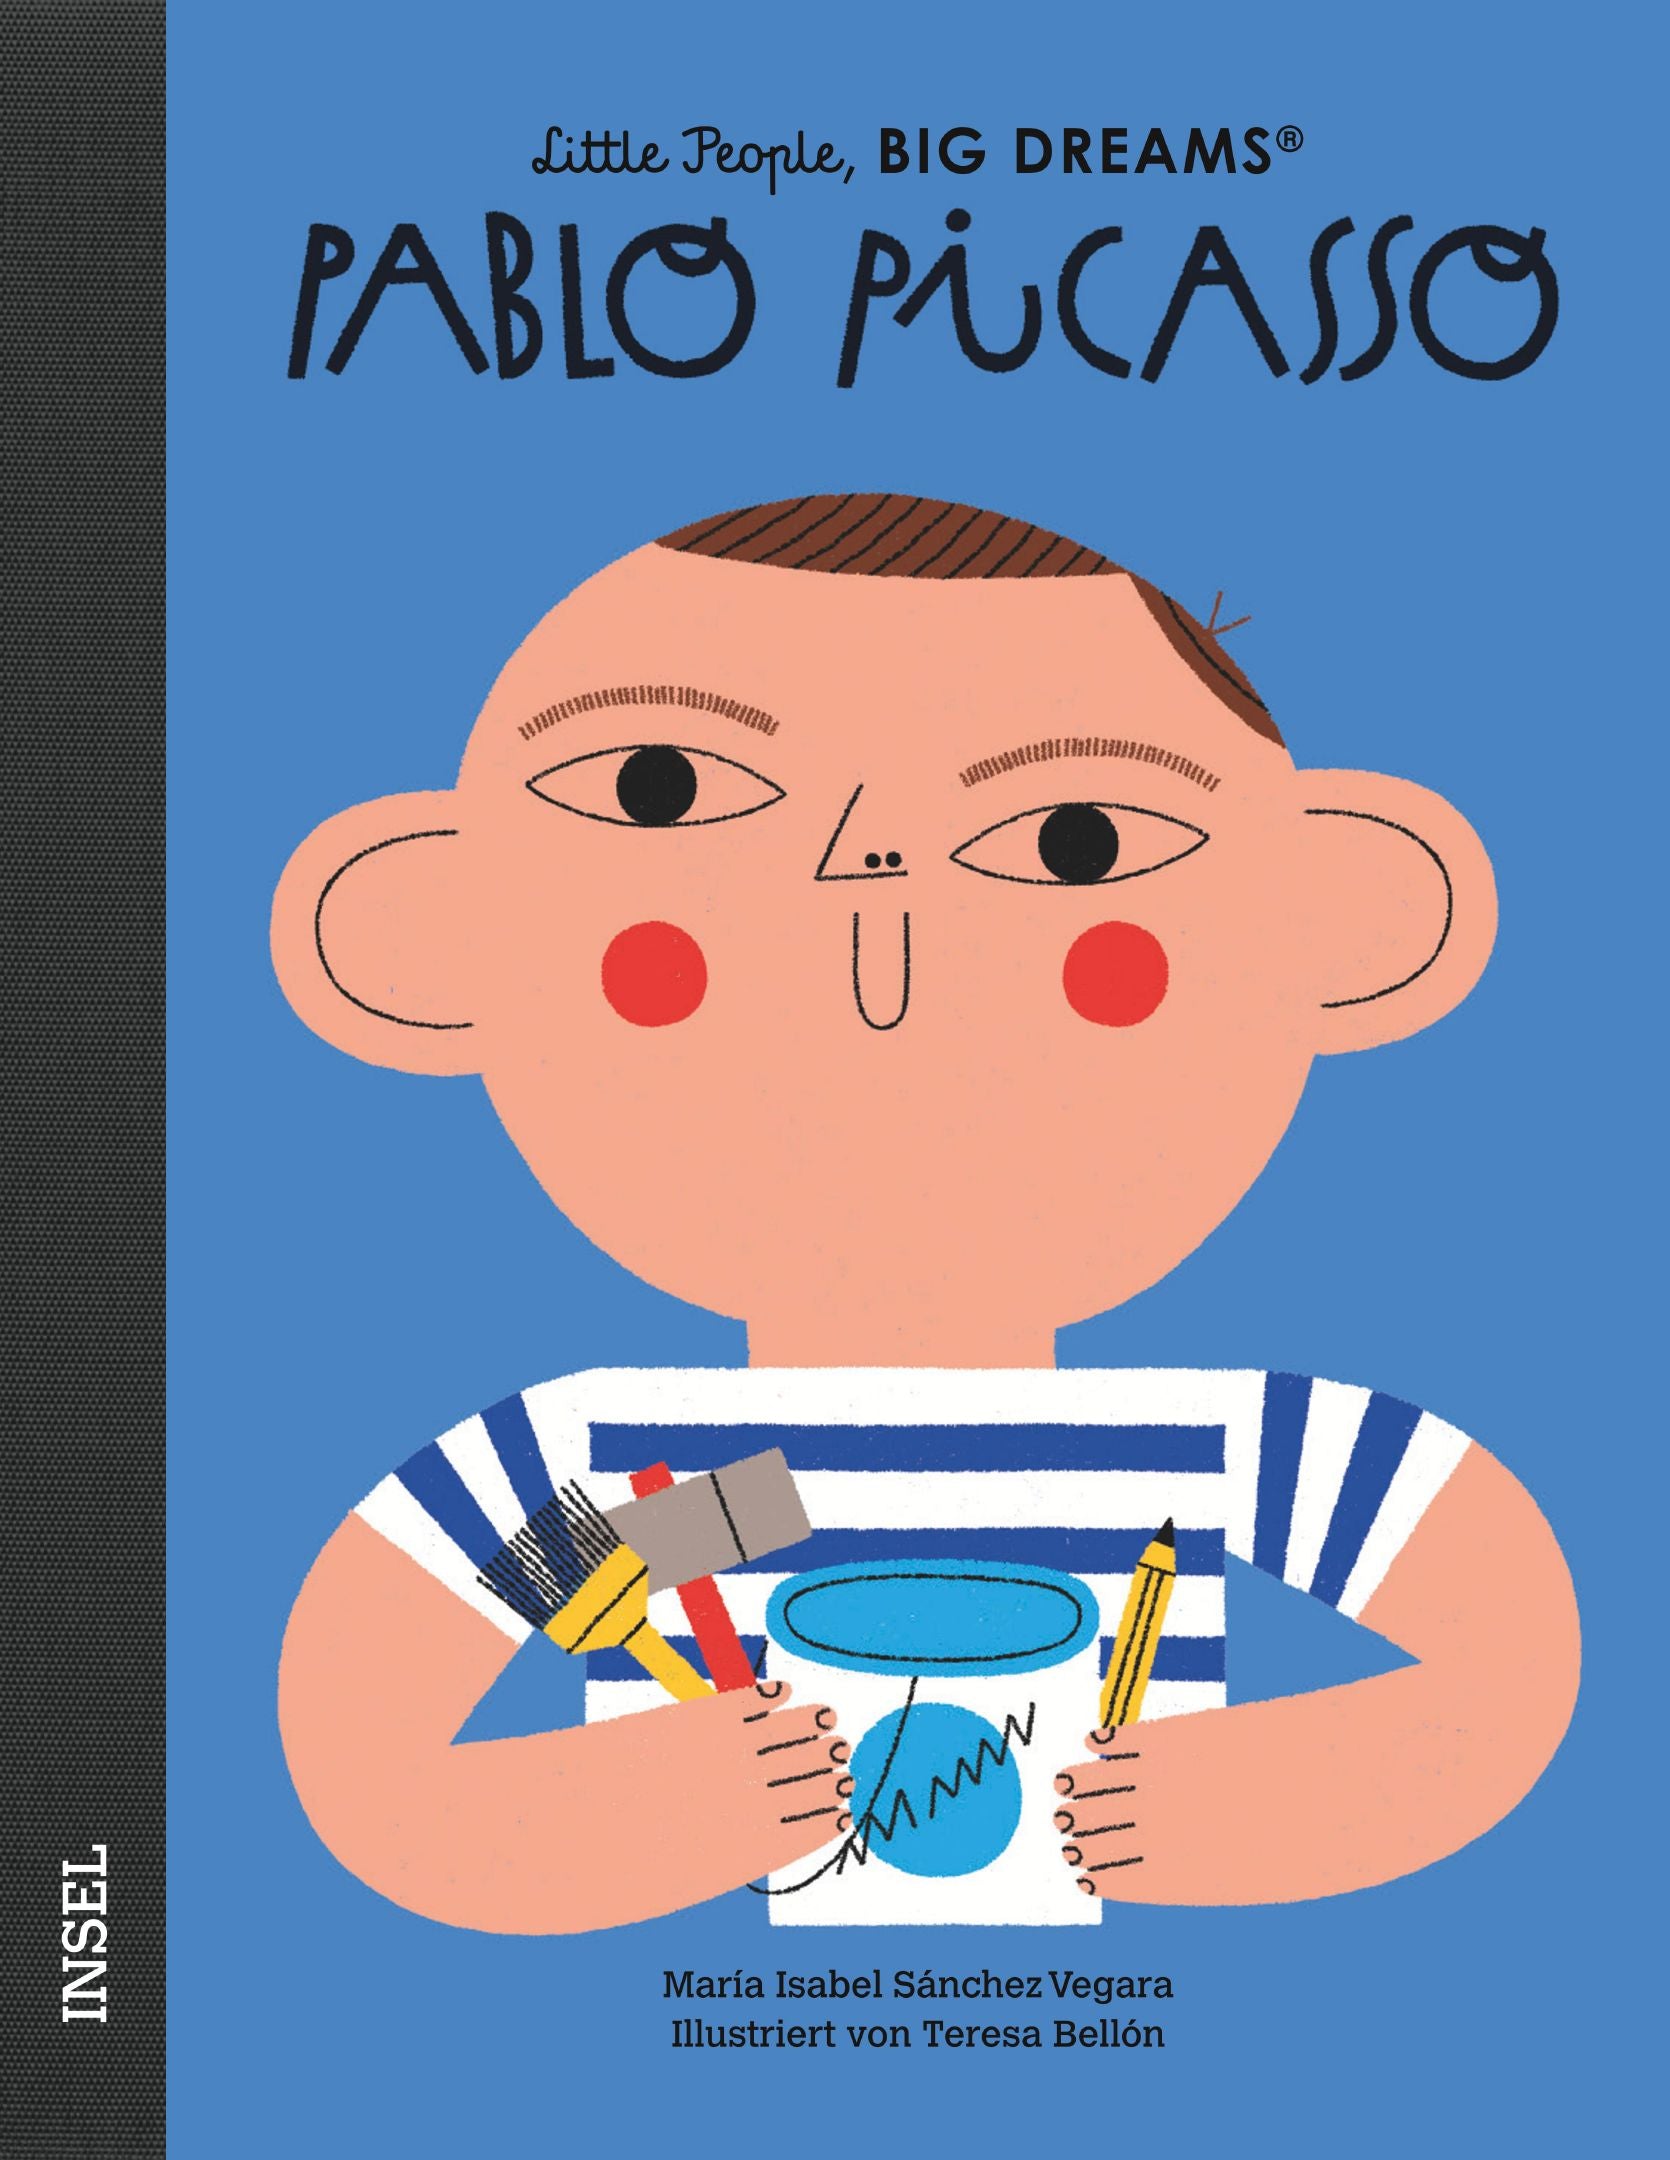 Little People - Pablo Picasso